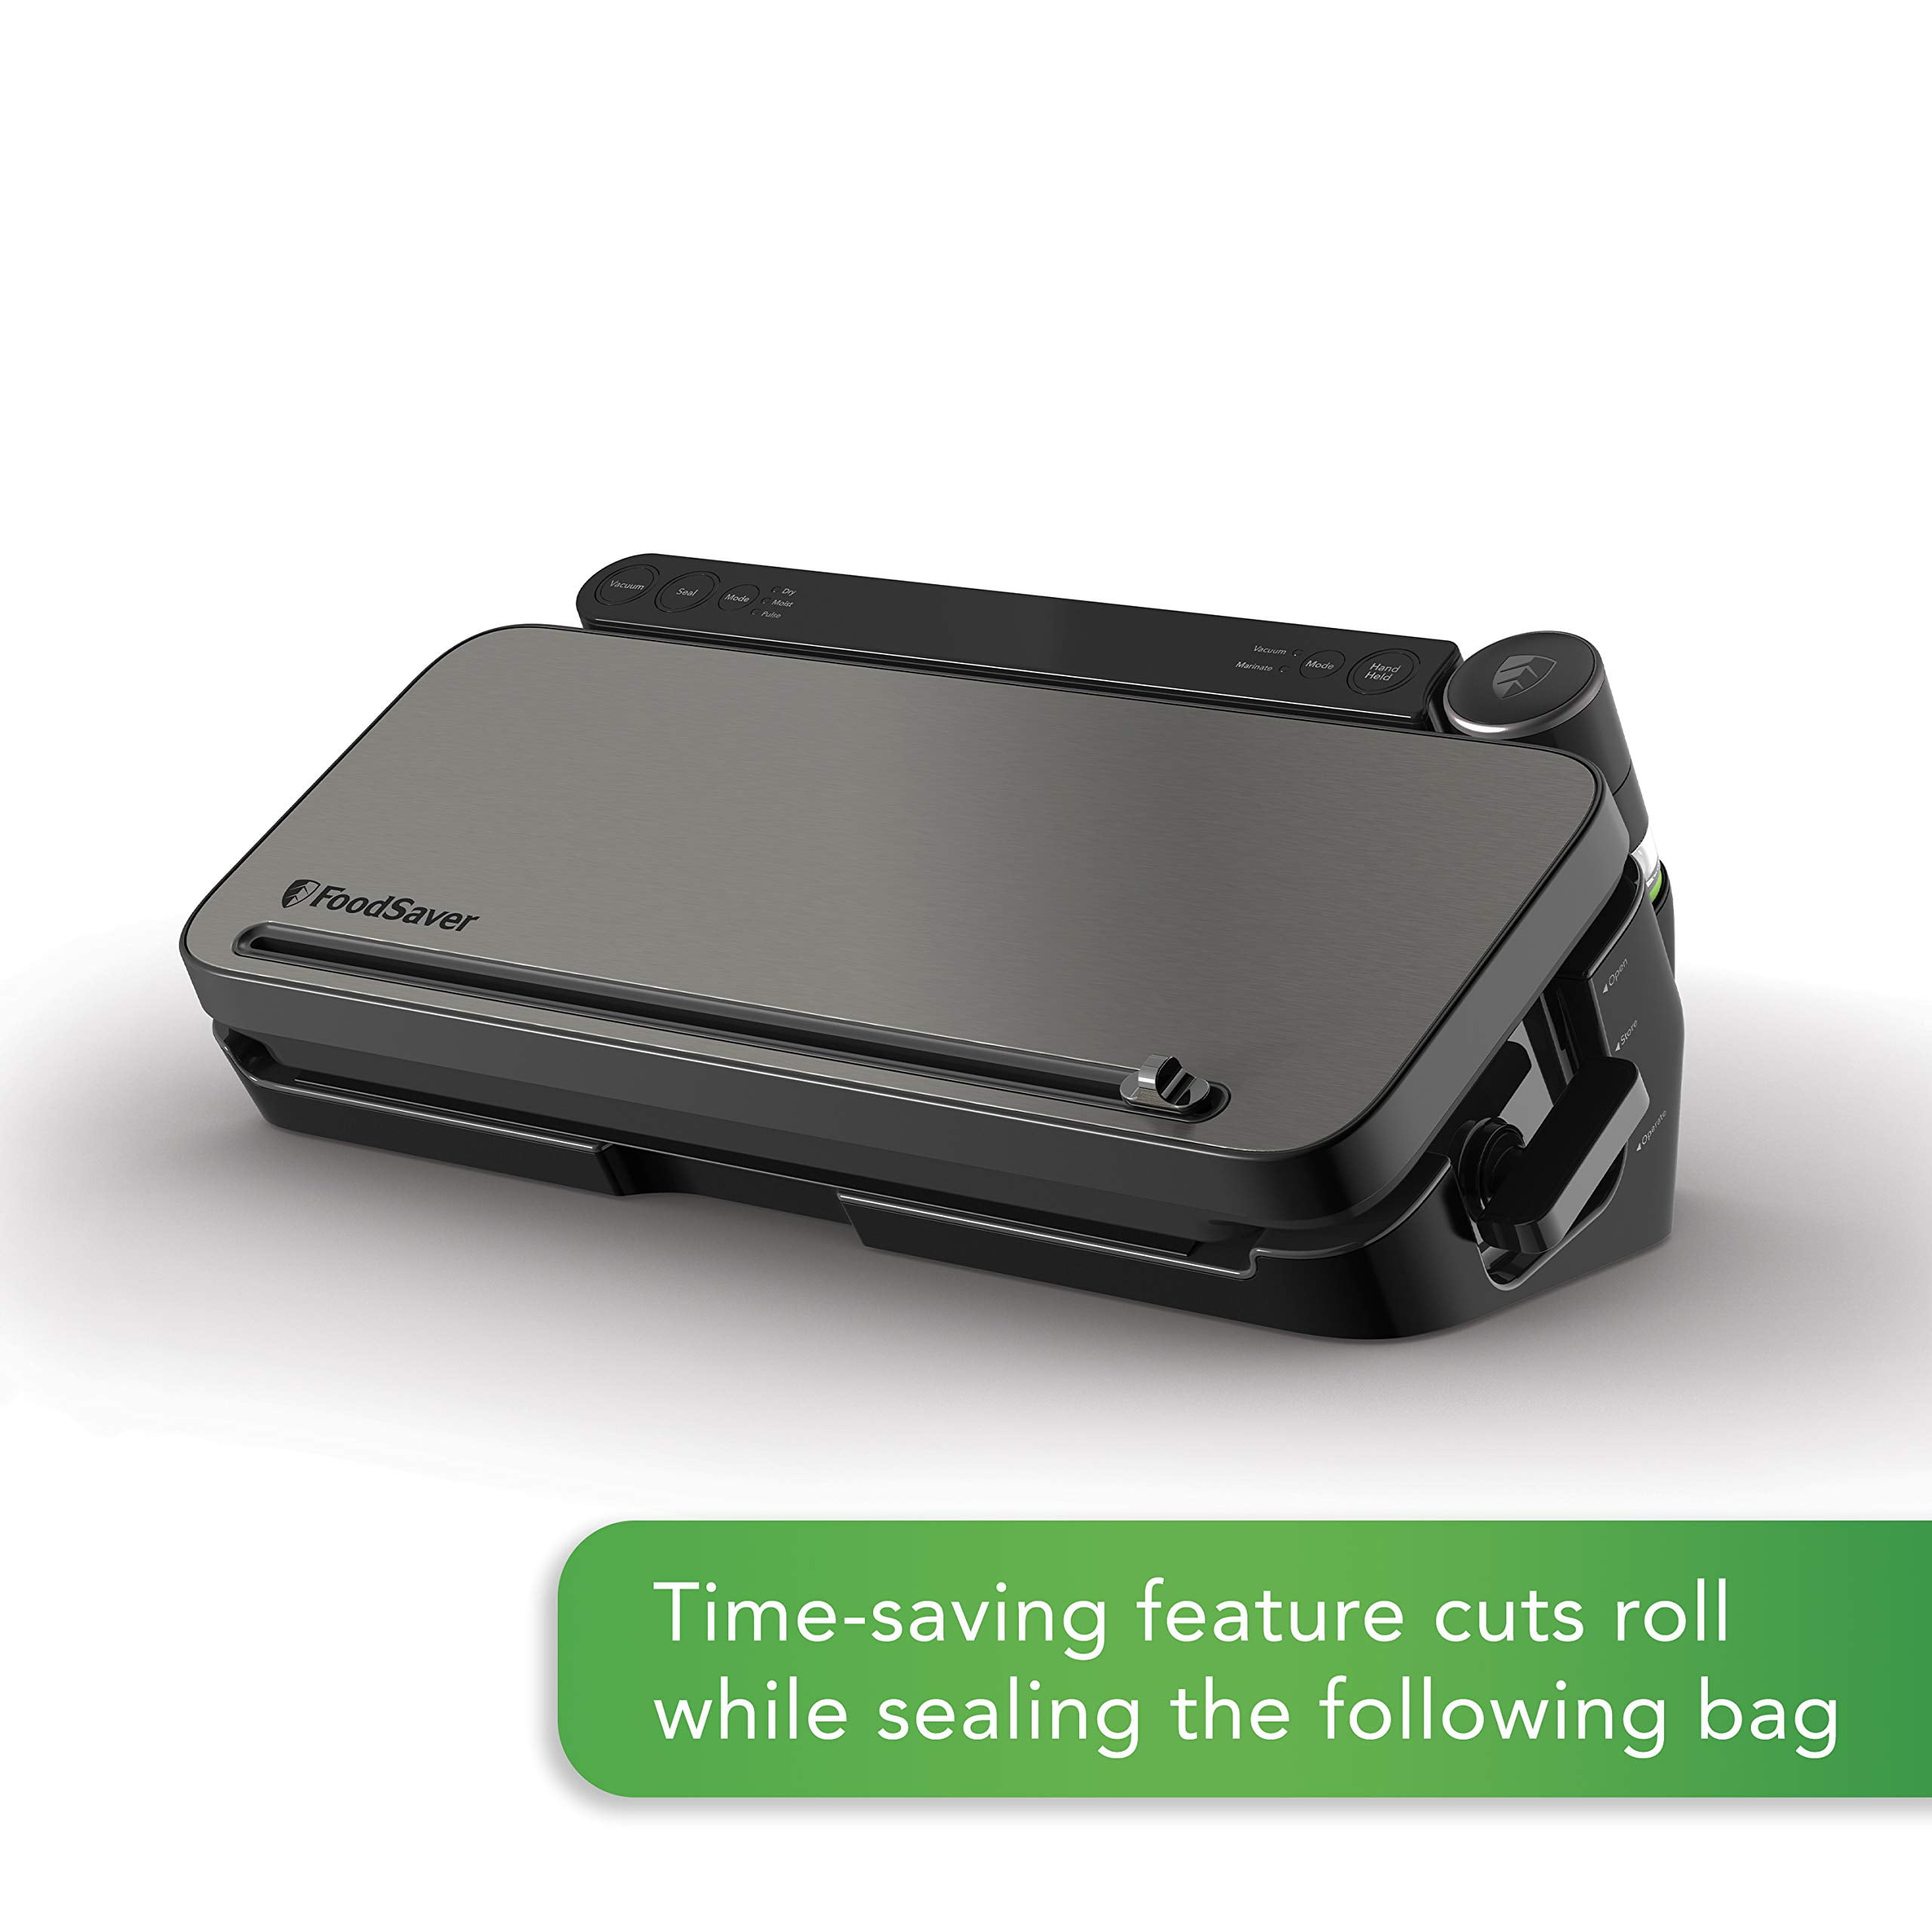 The FoodSaver® Multi-Use Vacuum Sealing and Food Preservation System 